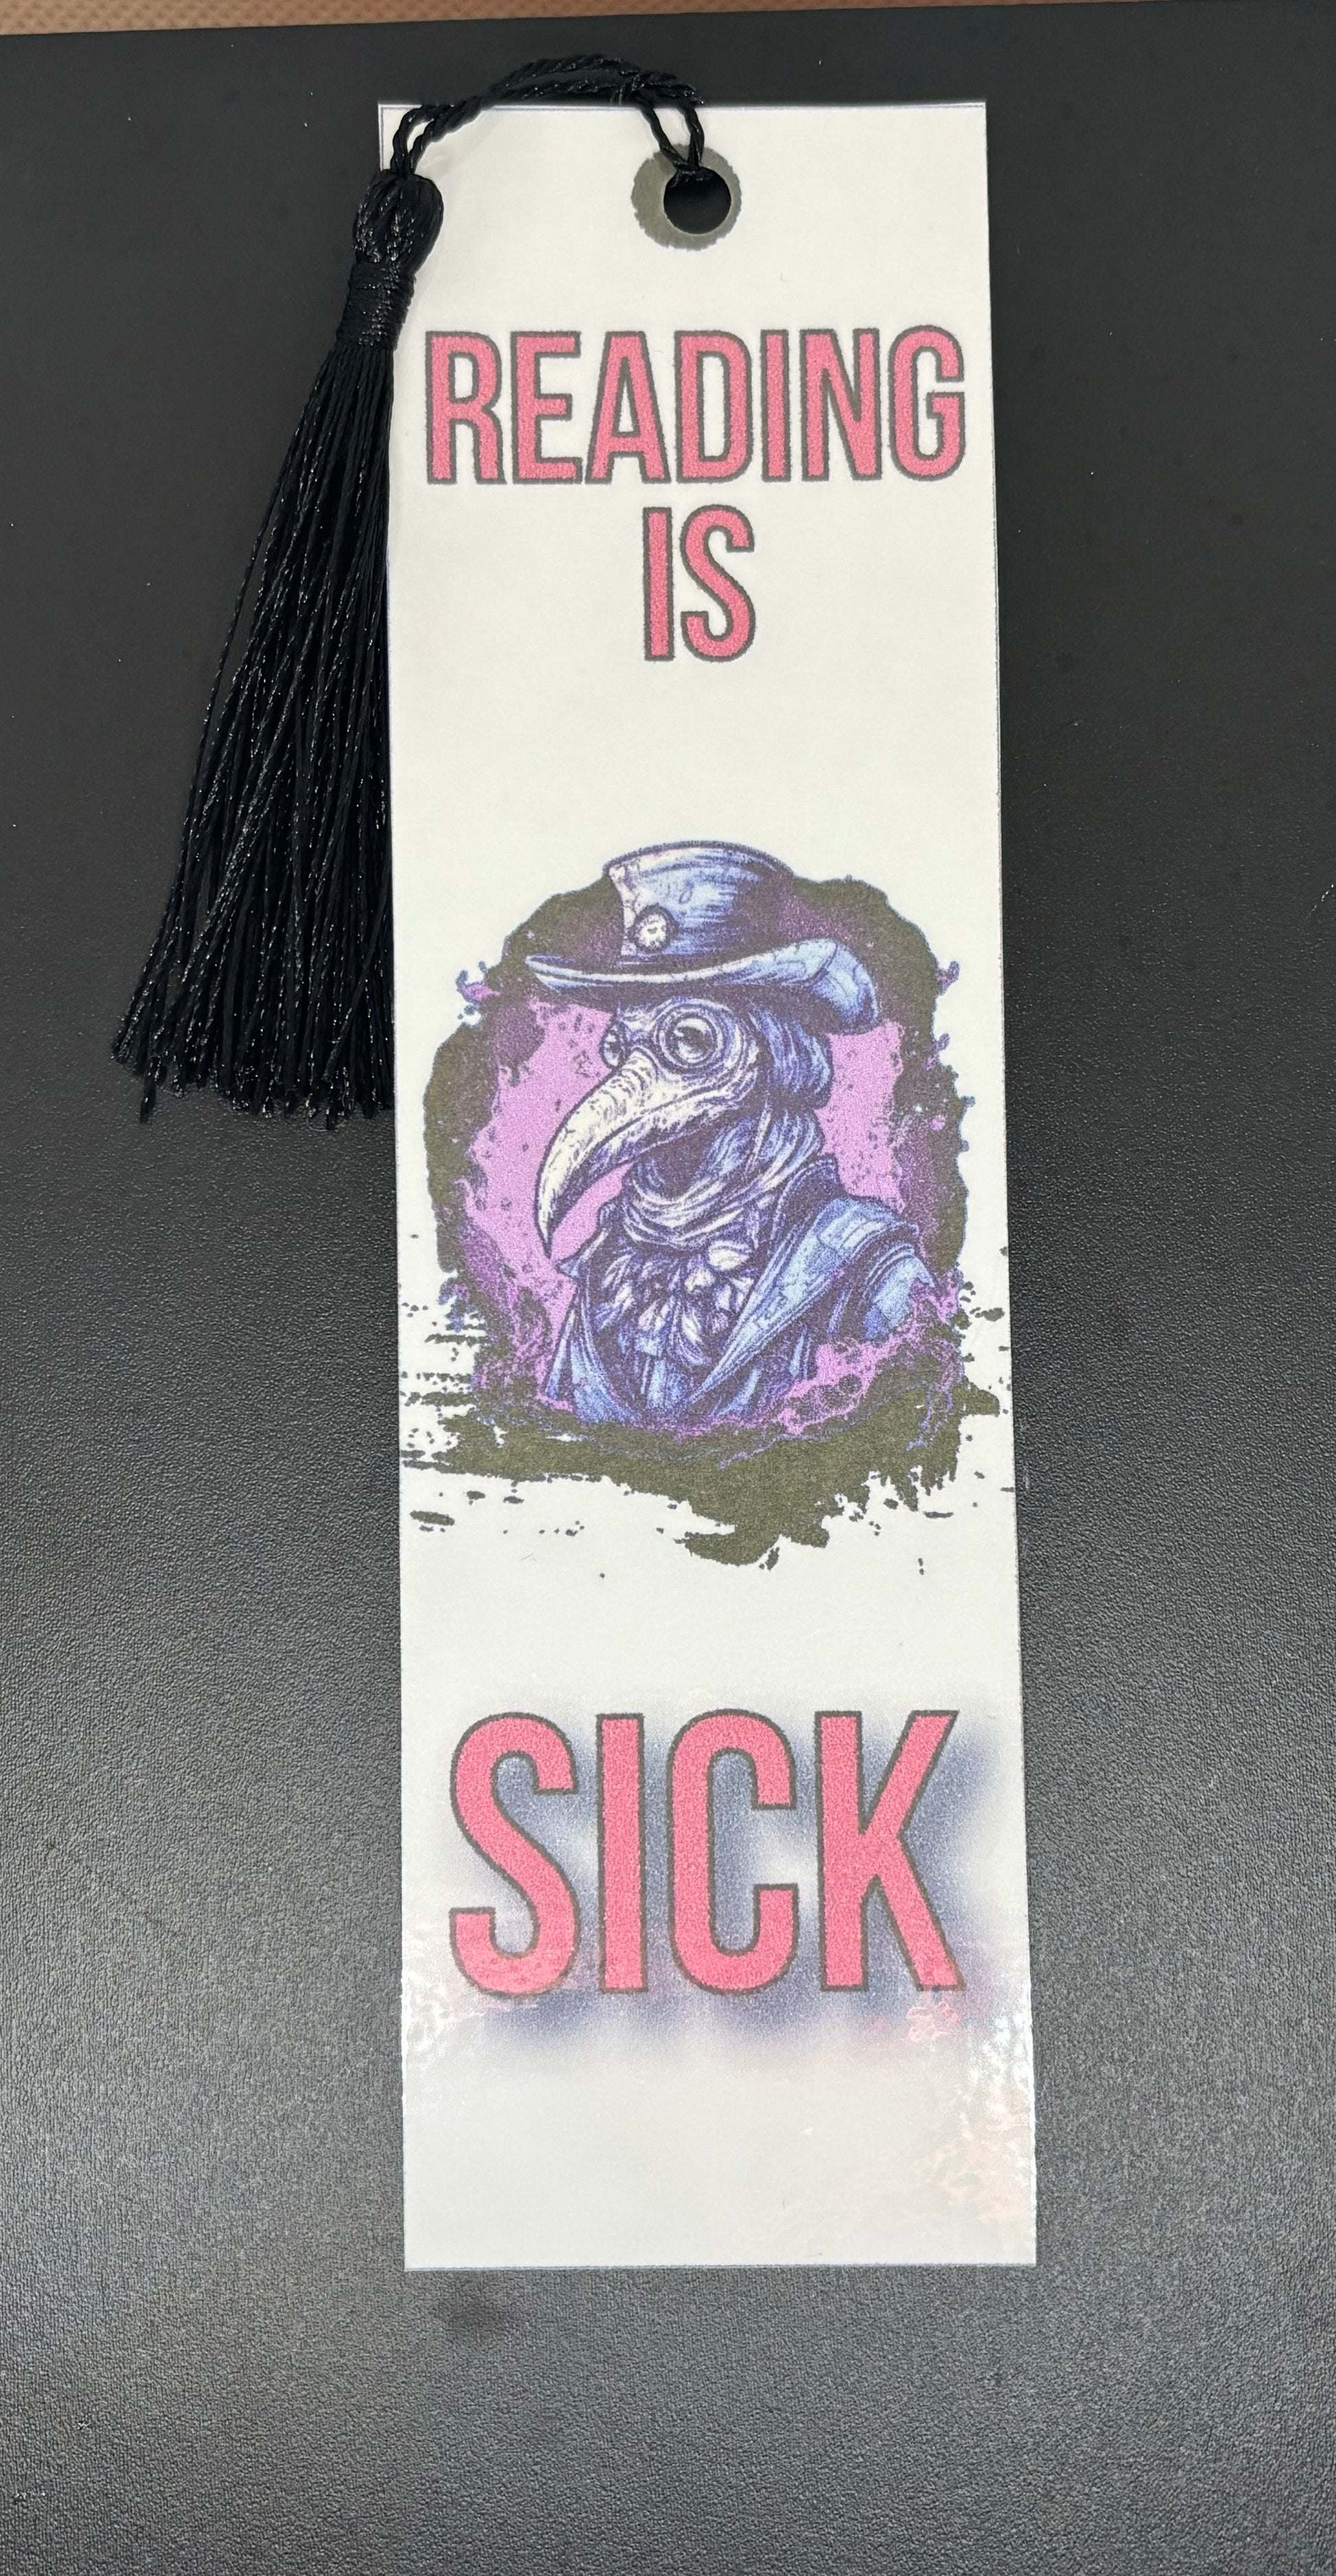 Plague Doctor Stickers (Set of 4) – Vintage 57